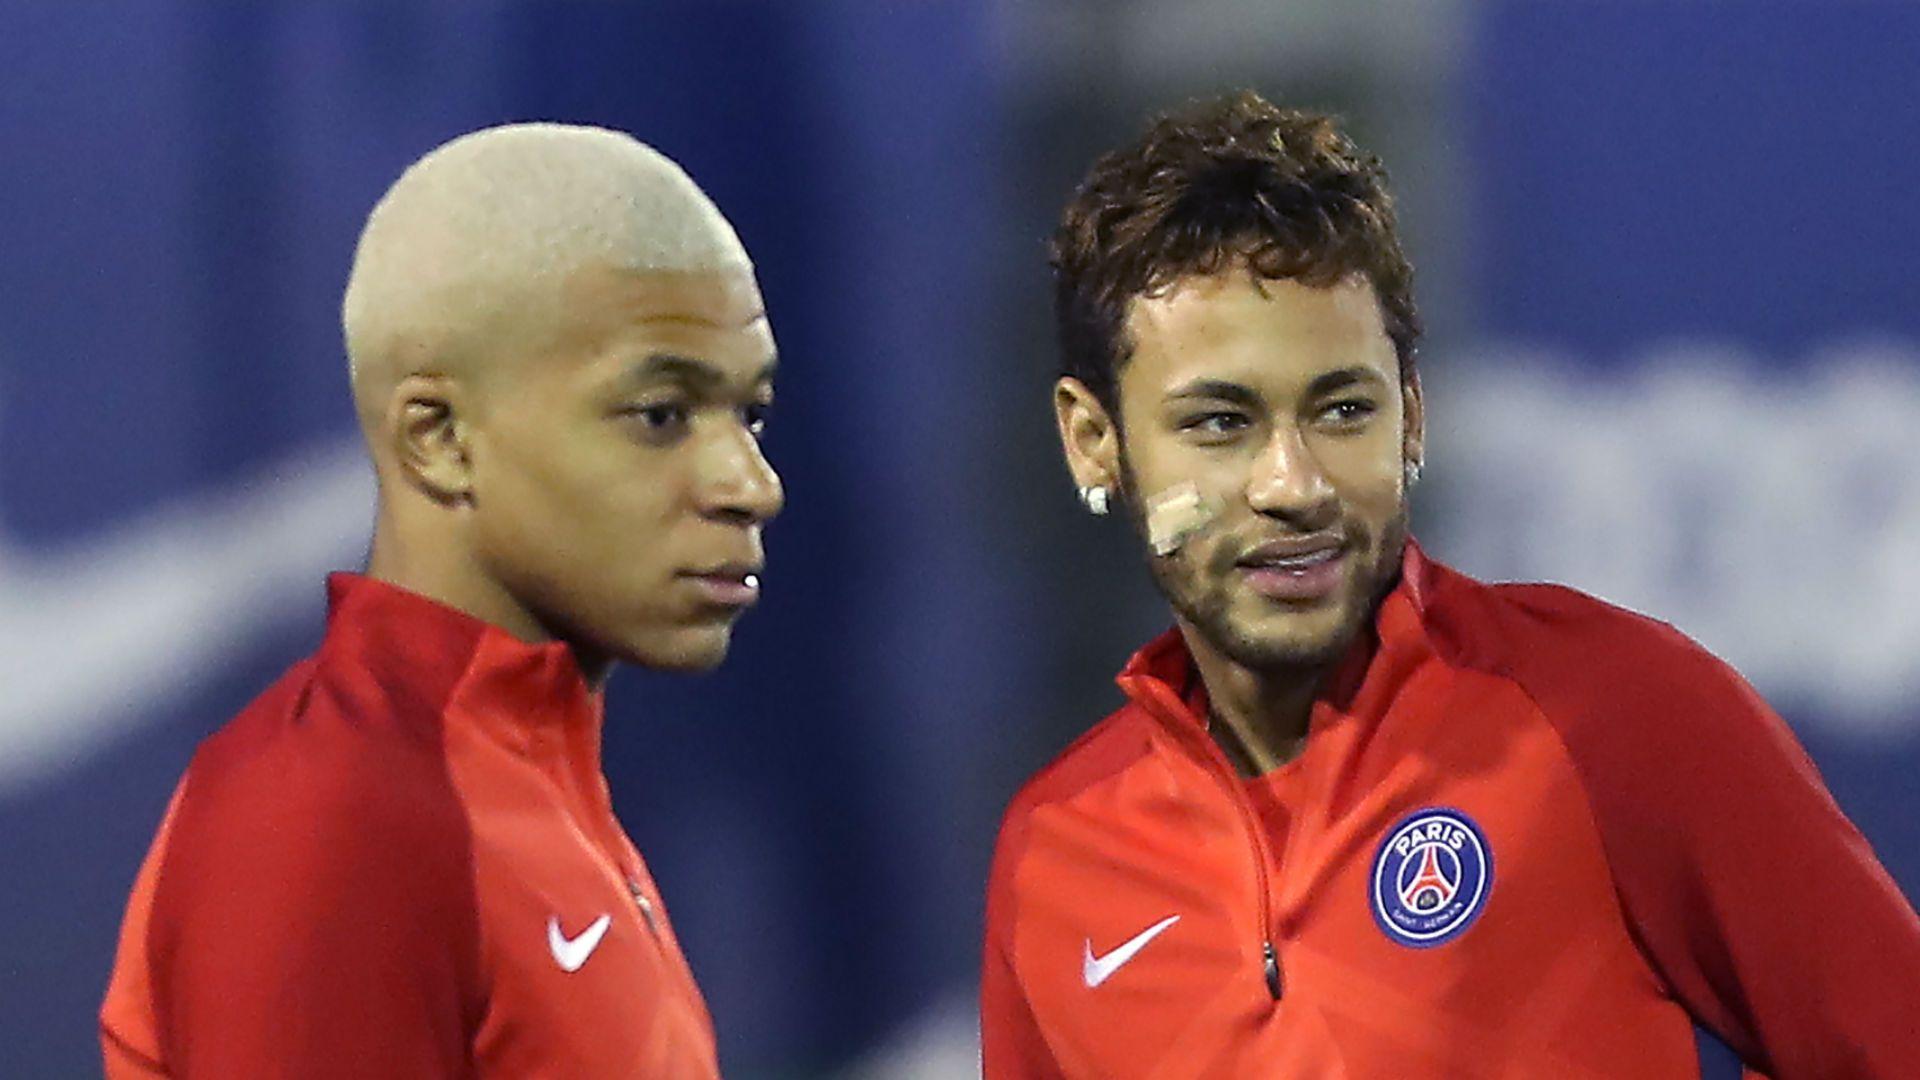 Neymar plays for the team, Mbappe claims. LIGUE 1 News